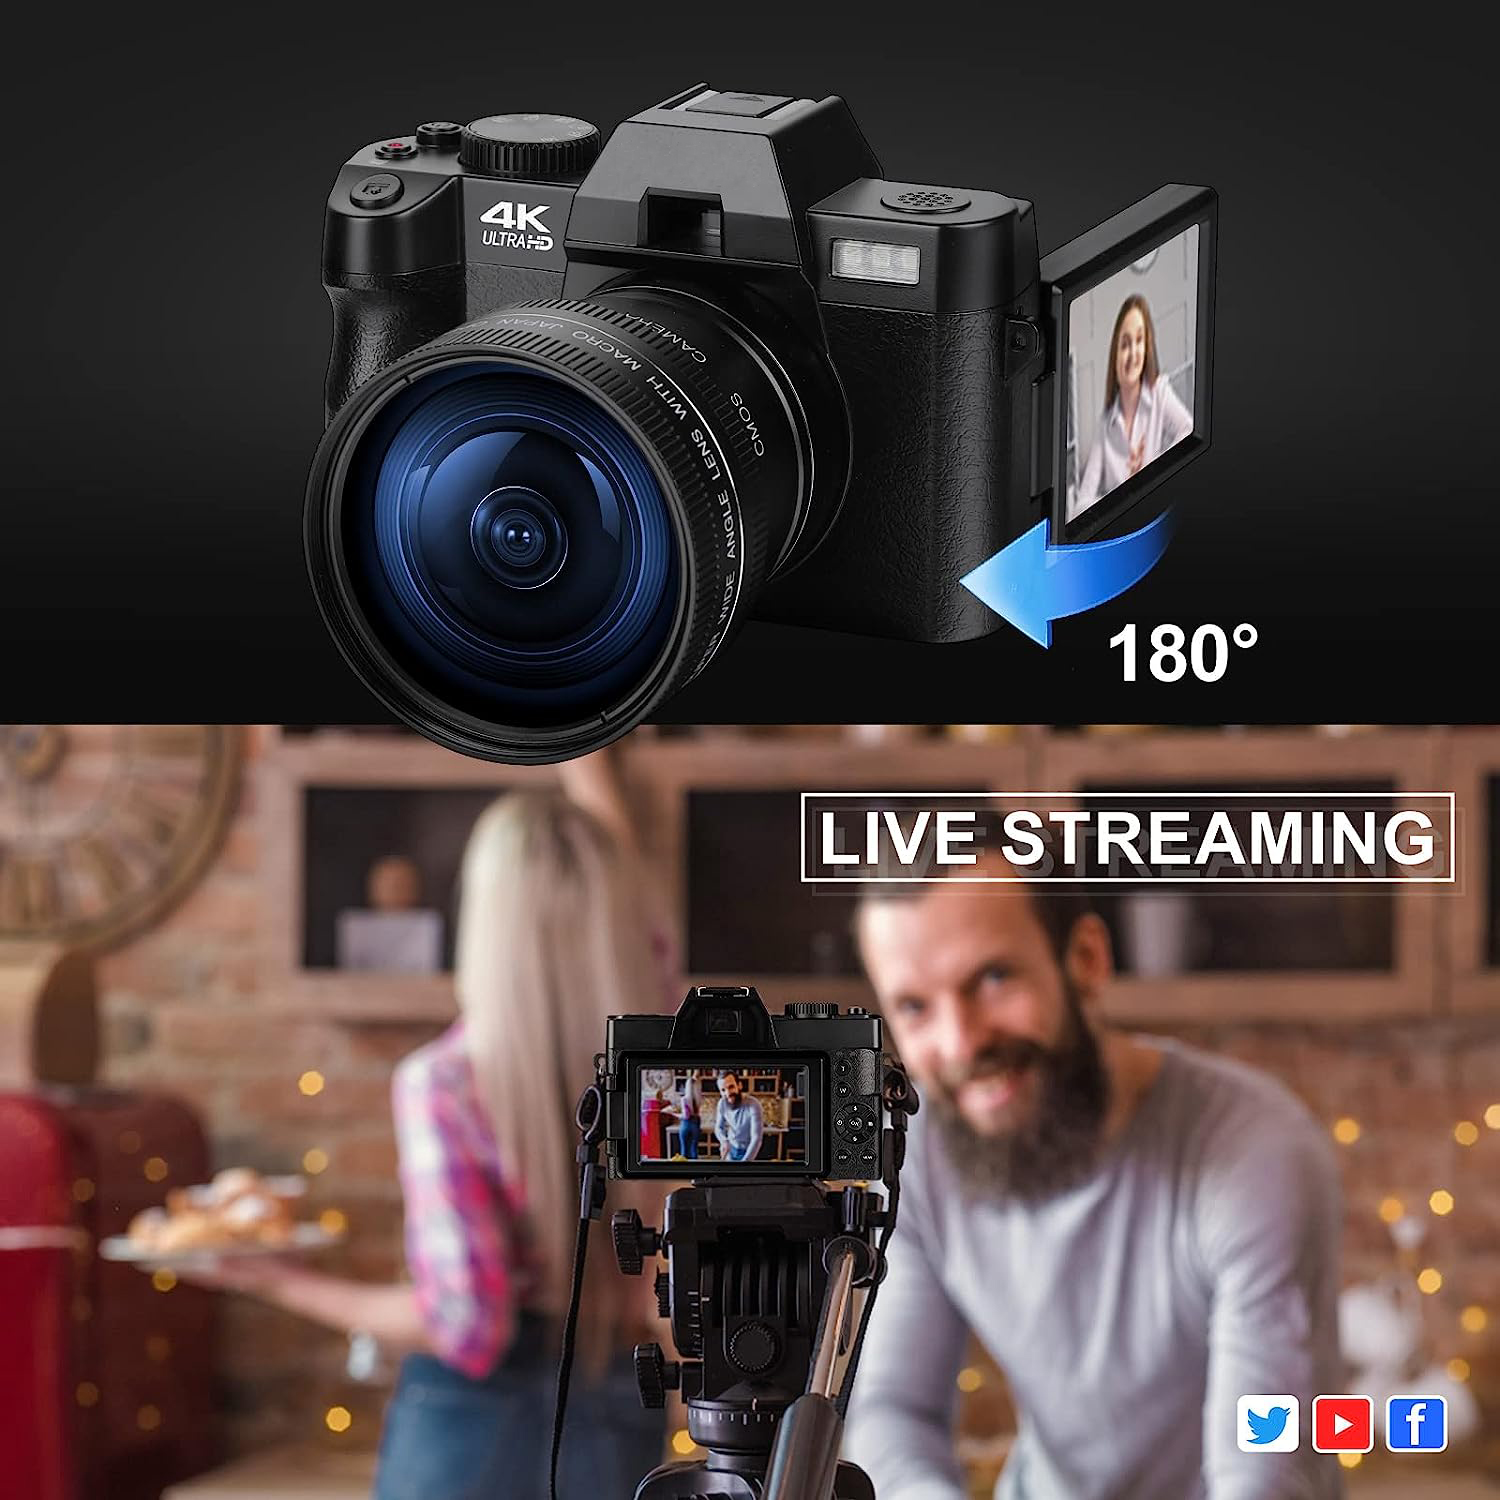 NBD Digital Camera 4K Ultra HD 48MP All-in-One Vlogging Camera with Wide Angle Lens, Digital Zoom 16x and 3" Screen - image 3 of 6